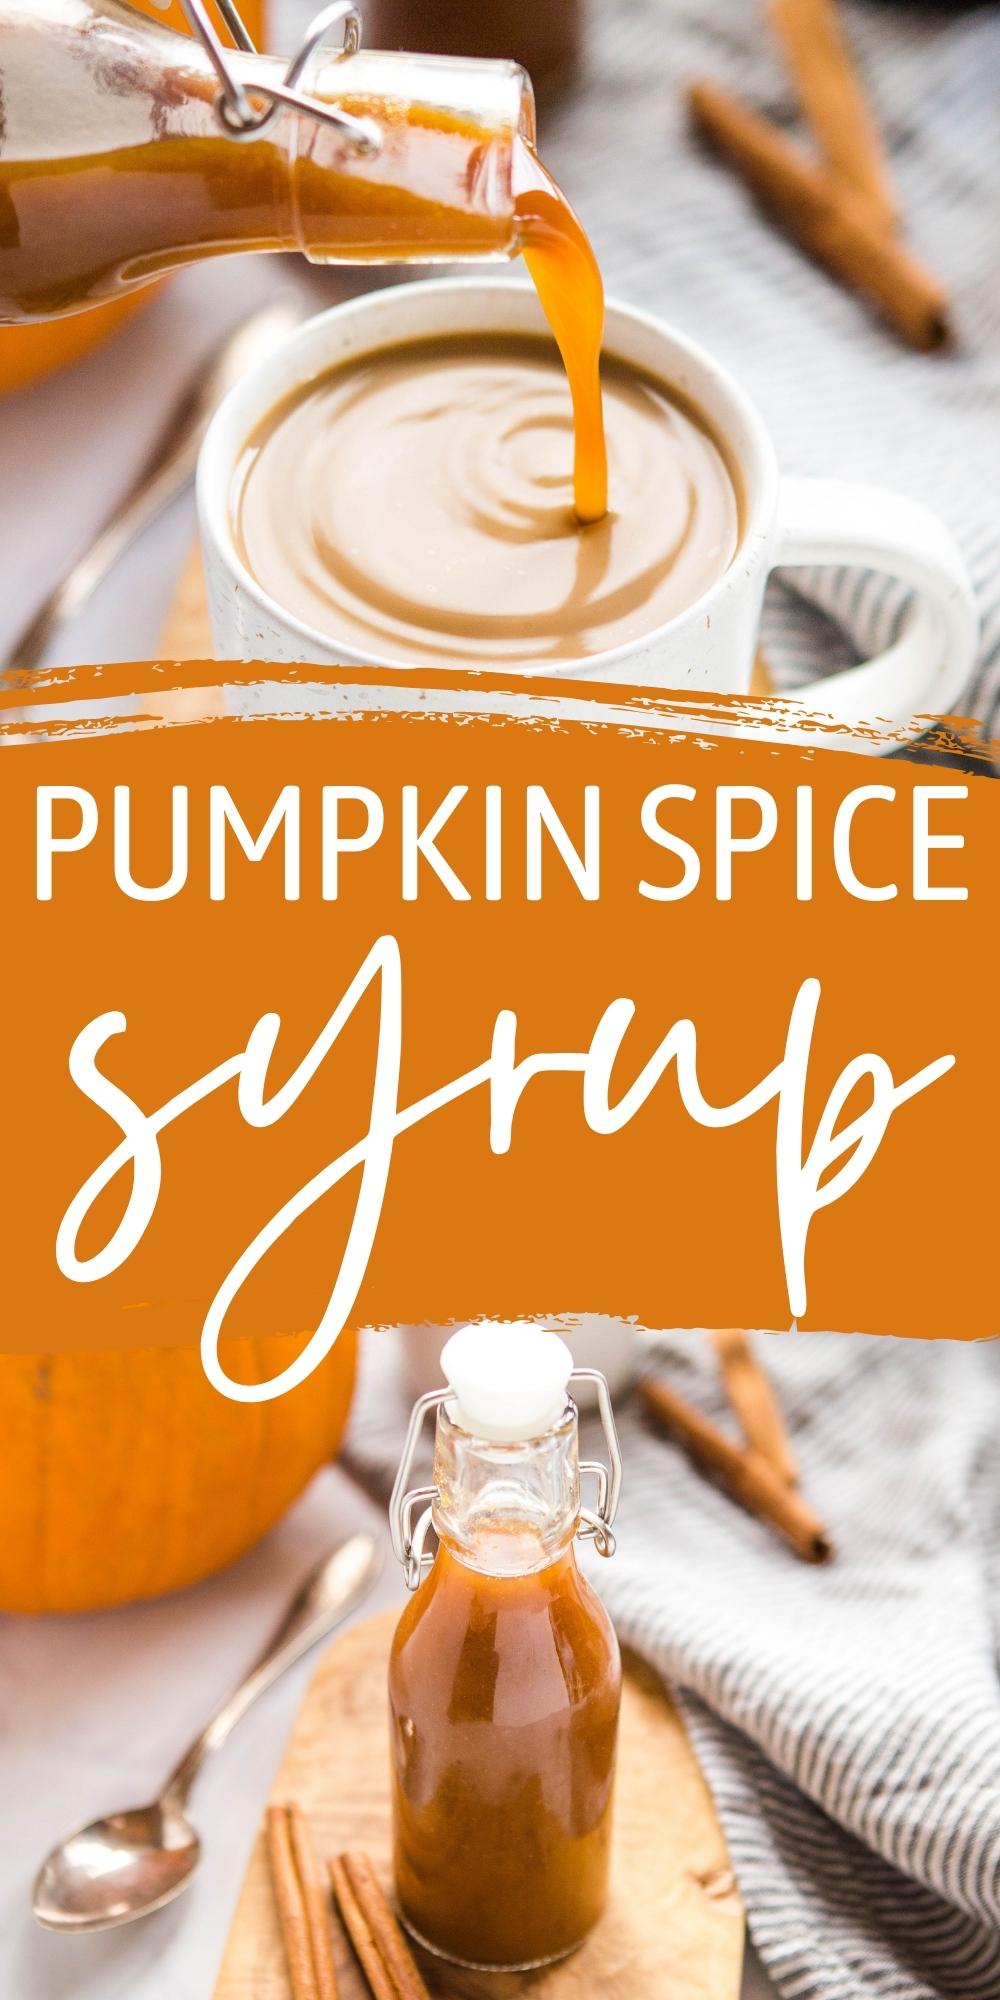 This Pumpkin Spice Syrup is the perfect addition to your all your fall drinks. Easy to make & perfect for waffles, pancakes & desserts! Recipe from thebusybaker.ca! #pumpkinspicesyrup #pumpkinspice #syrup #fallrecipe #pumpkinspice via @busybakerblog